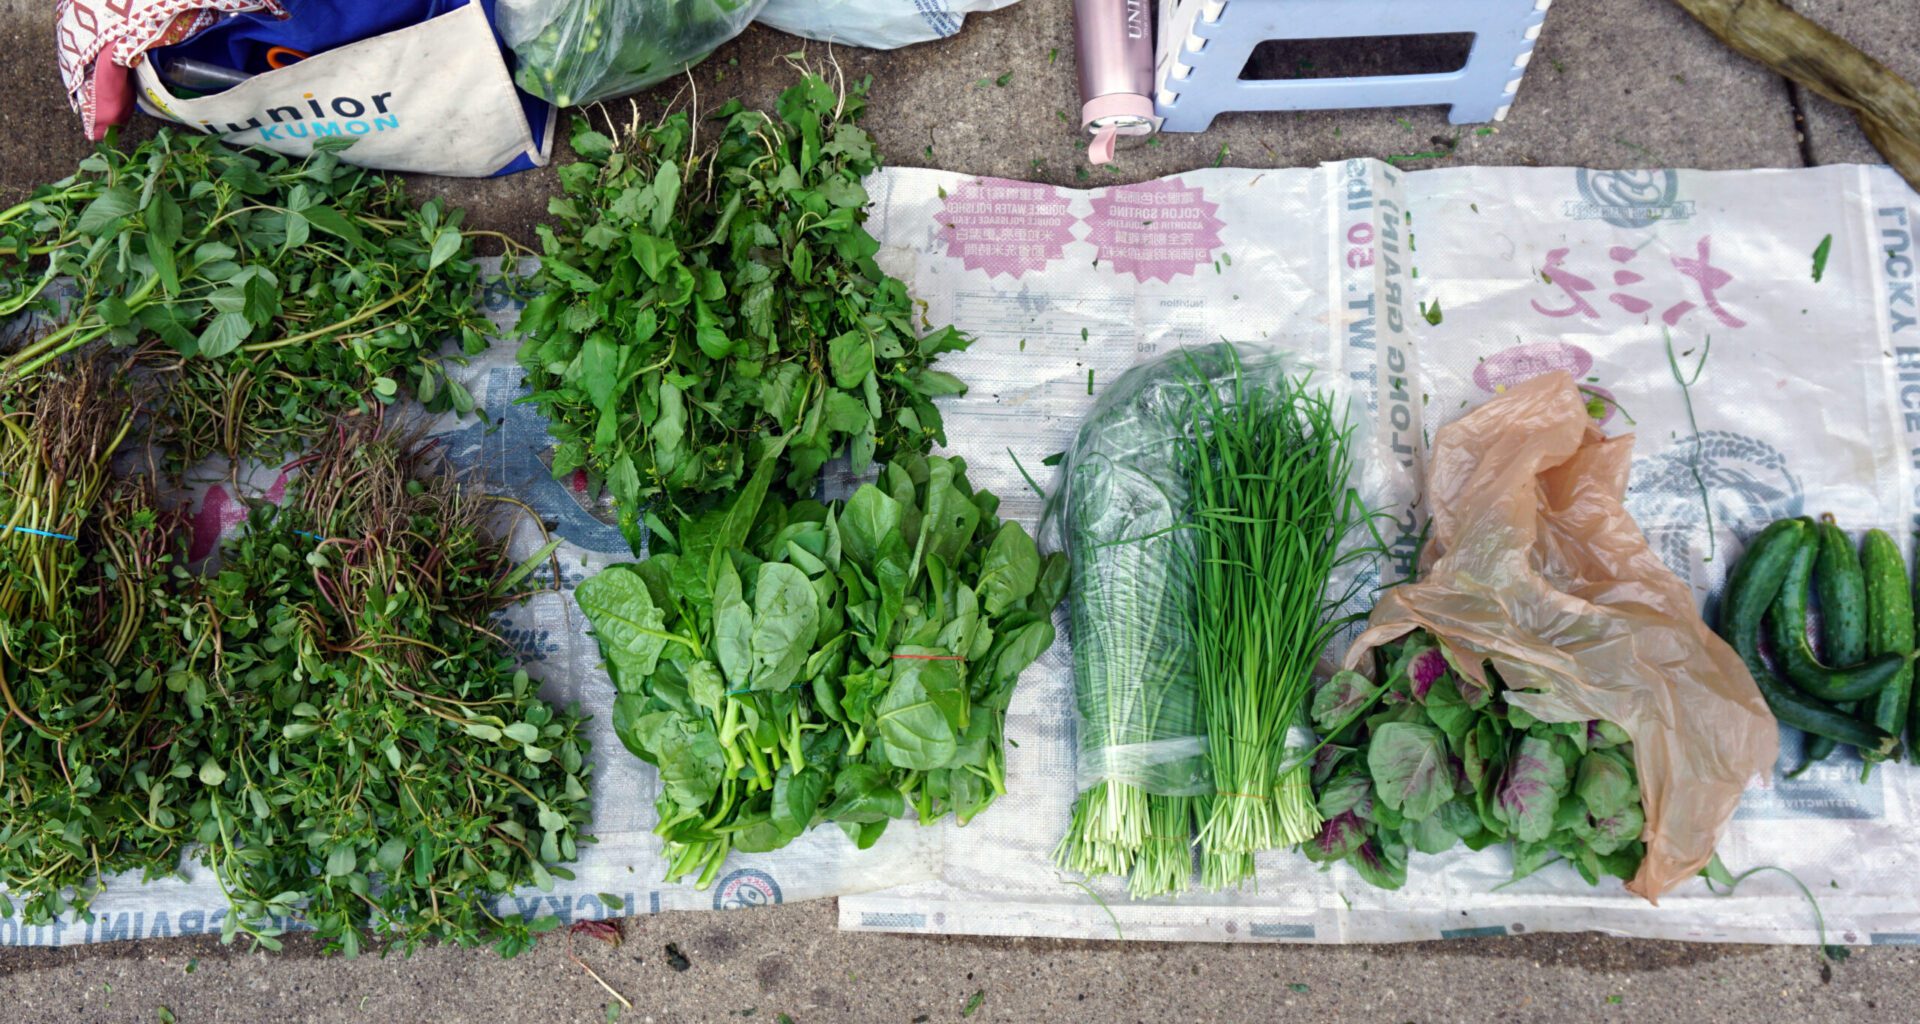 Photo showing piles of green produce laying on a towel on the ground